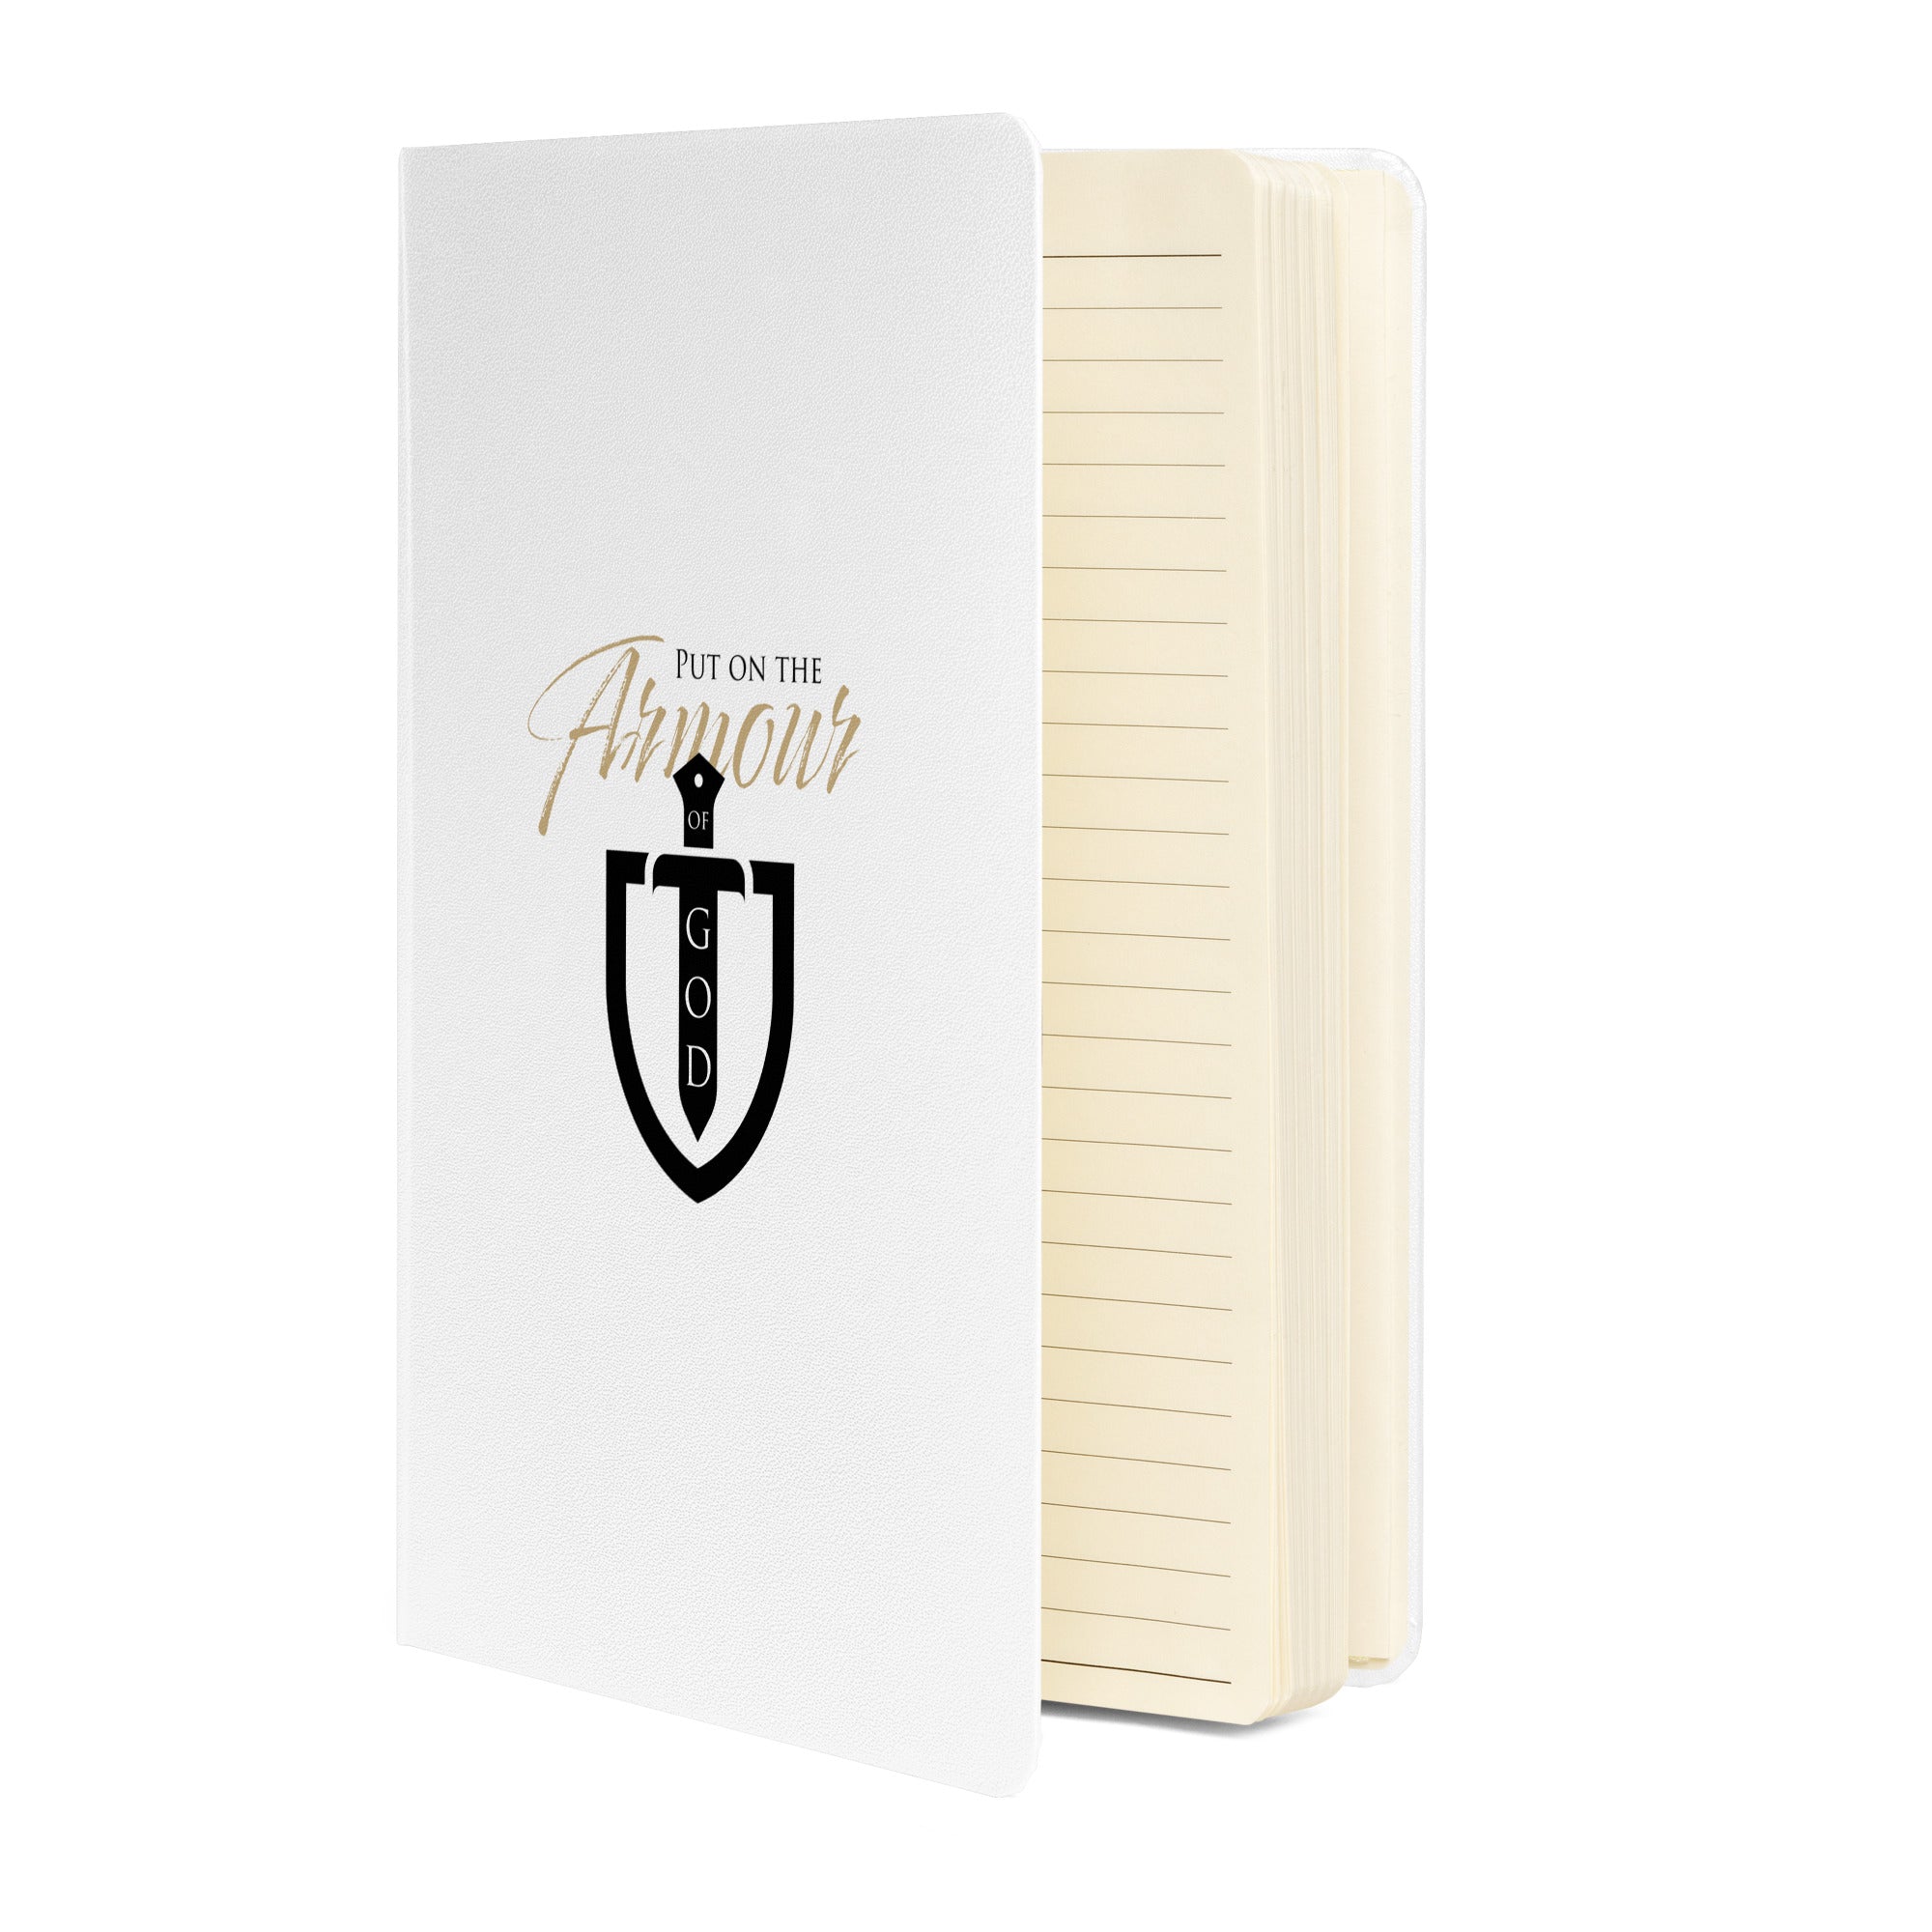 God's Armour | Hardcover bound notebook/journal